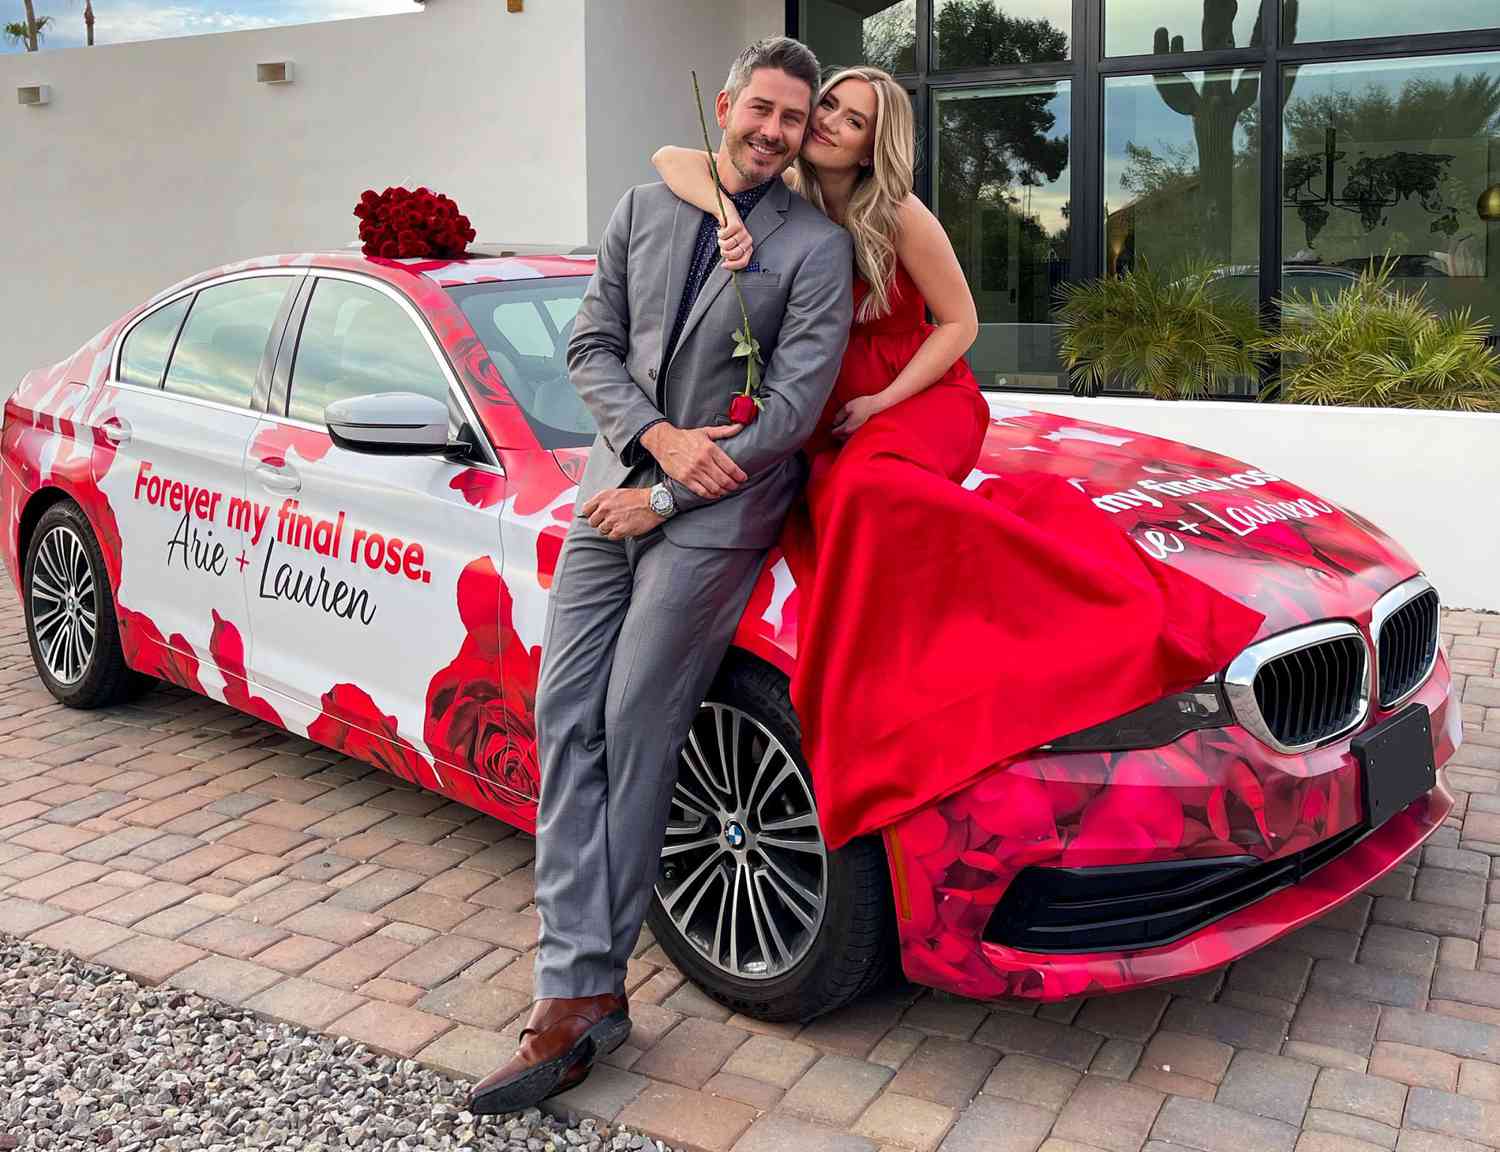 Scottsdale, Arizona, "The Bachelor" Season 22 star Arie Luyendyk Jr. got a hand from Hertz to surprise his wife Lauren Burnham Luyendyk with a special Valentine's-themed ride